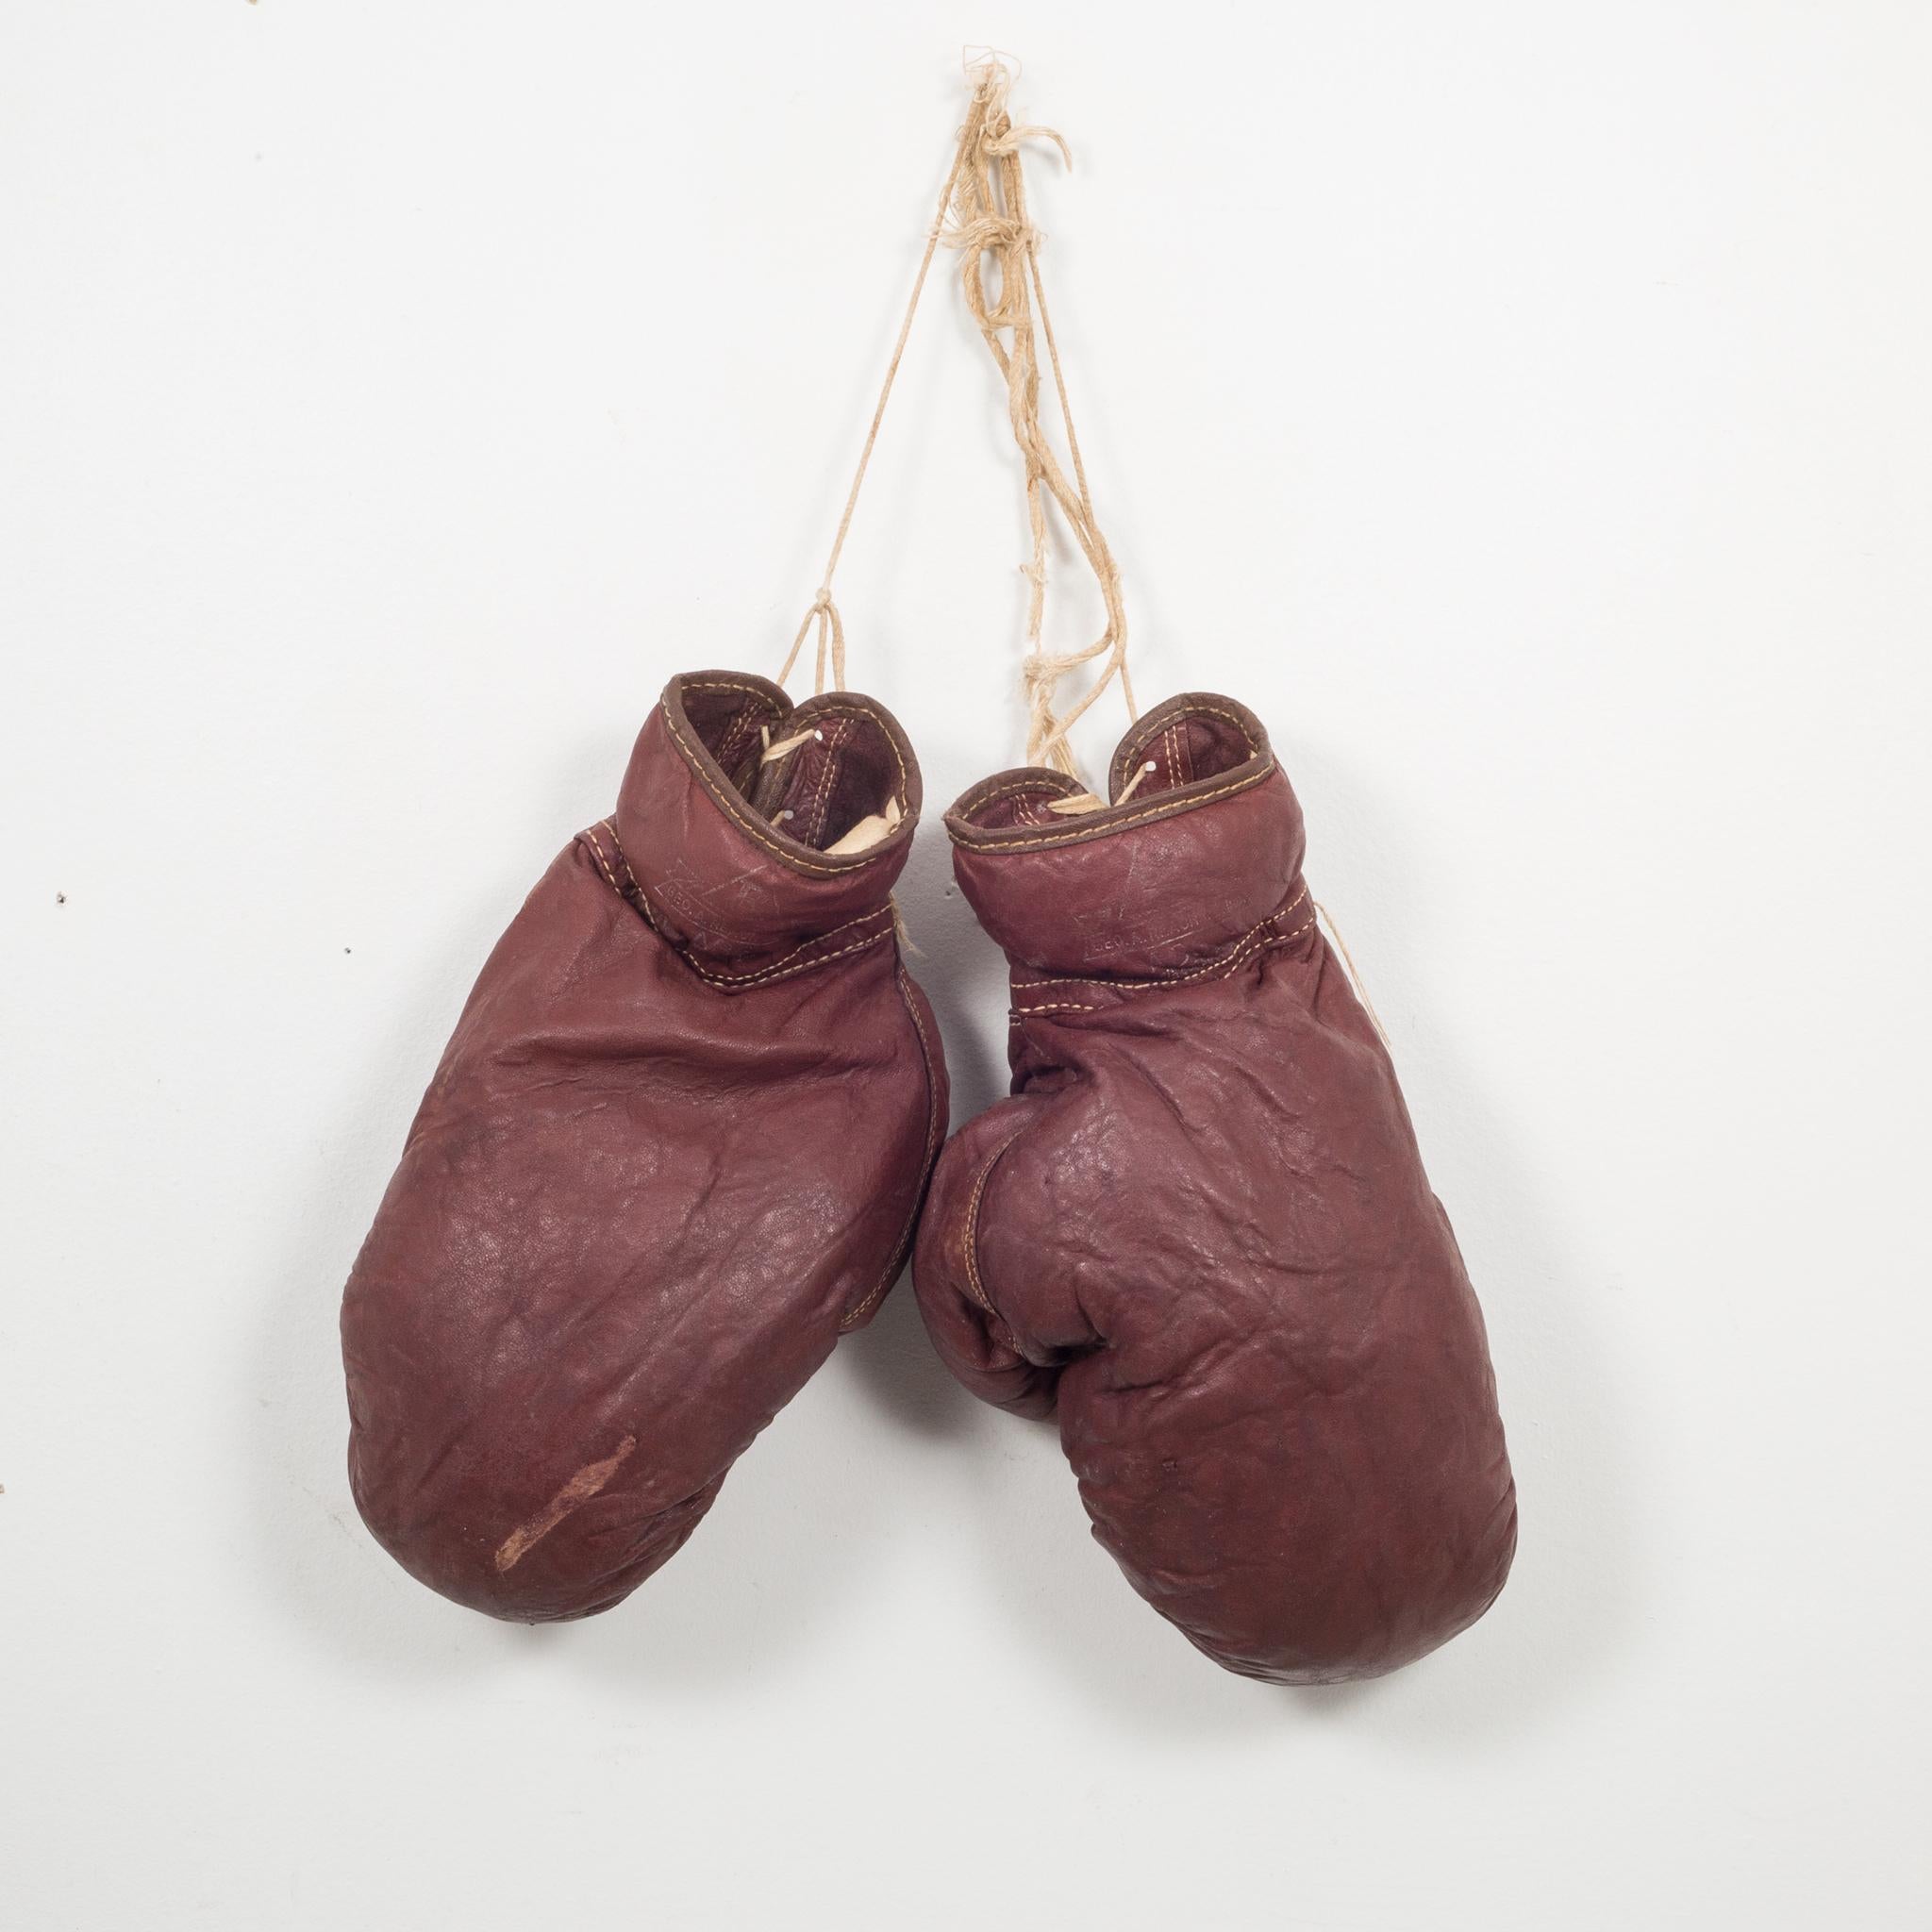 About

These are authentic vintage boxing gloves with reddish, brown leather filled with horse hair. Each glove has tan leather piping and tan laces. The leather is very soft and in good condition.

 Creator George A. Reach Co.
Date of